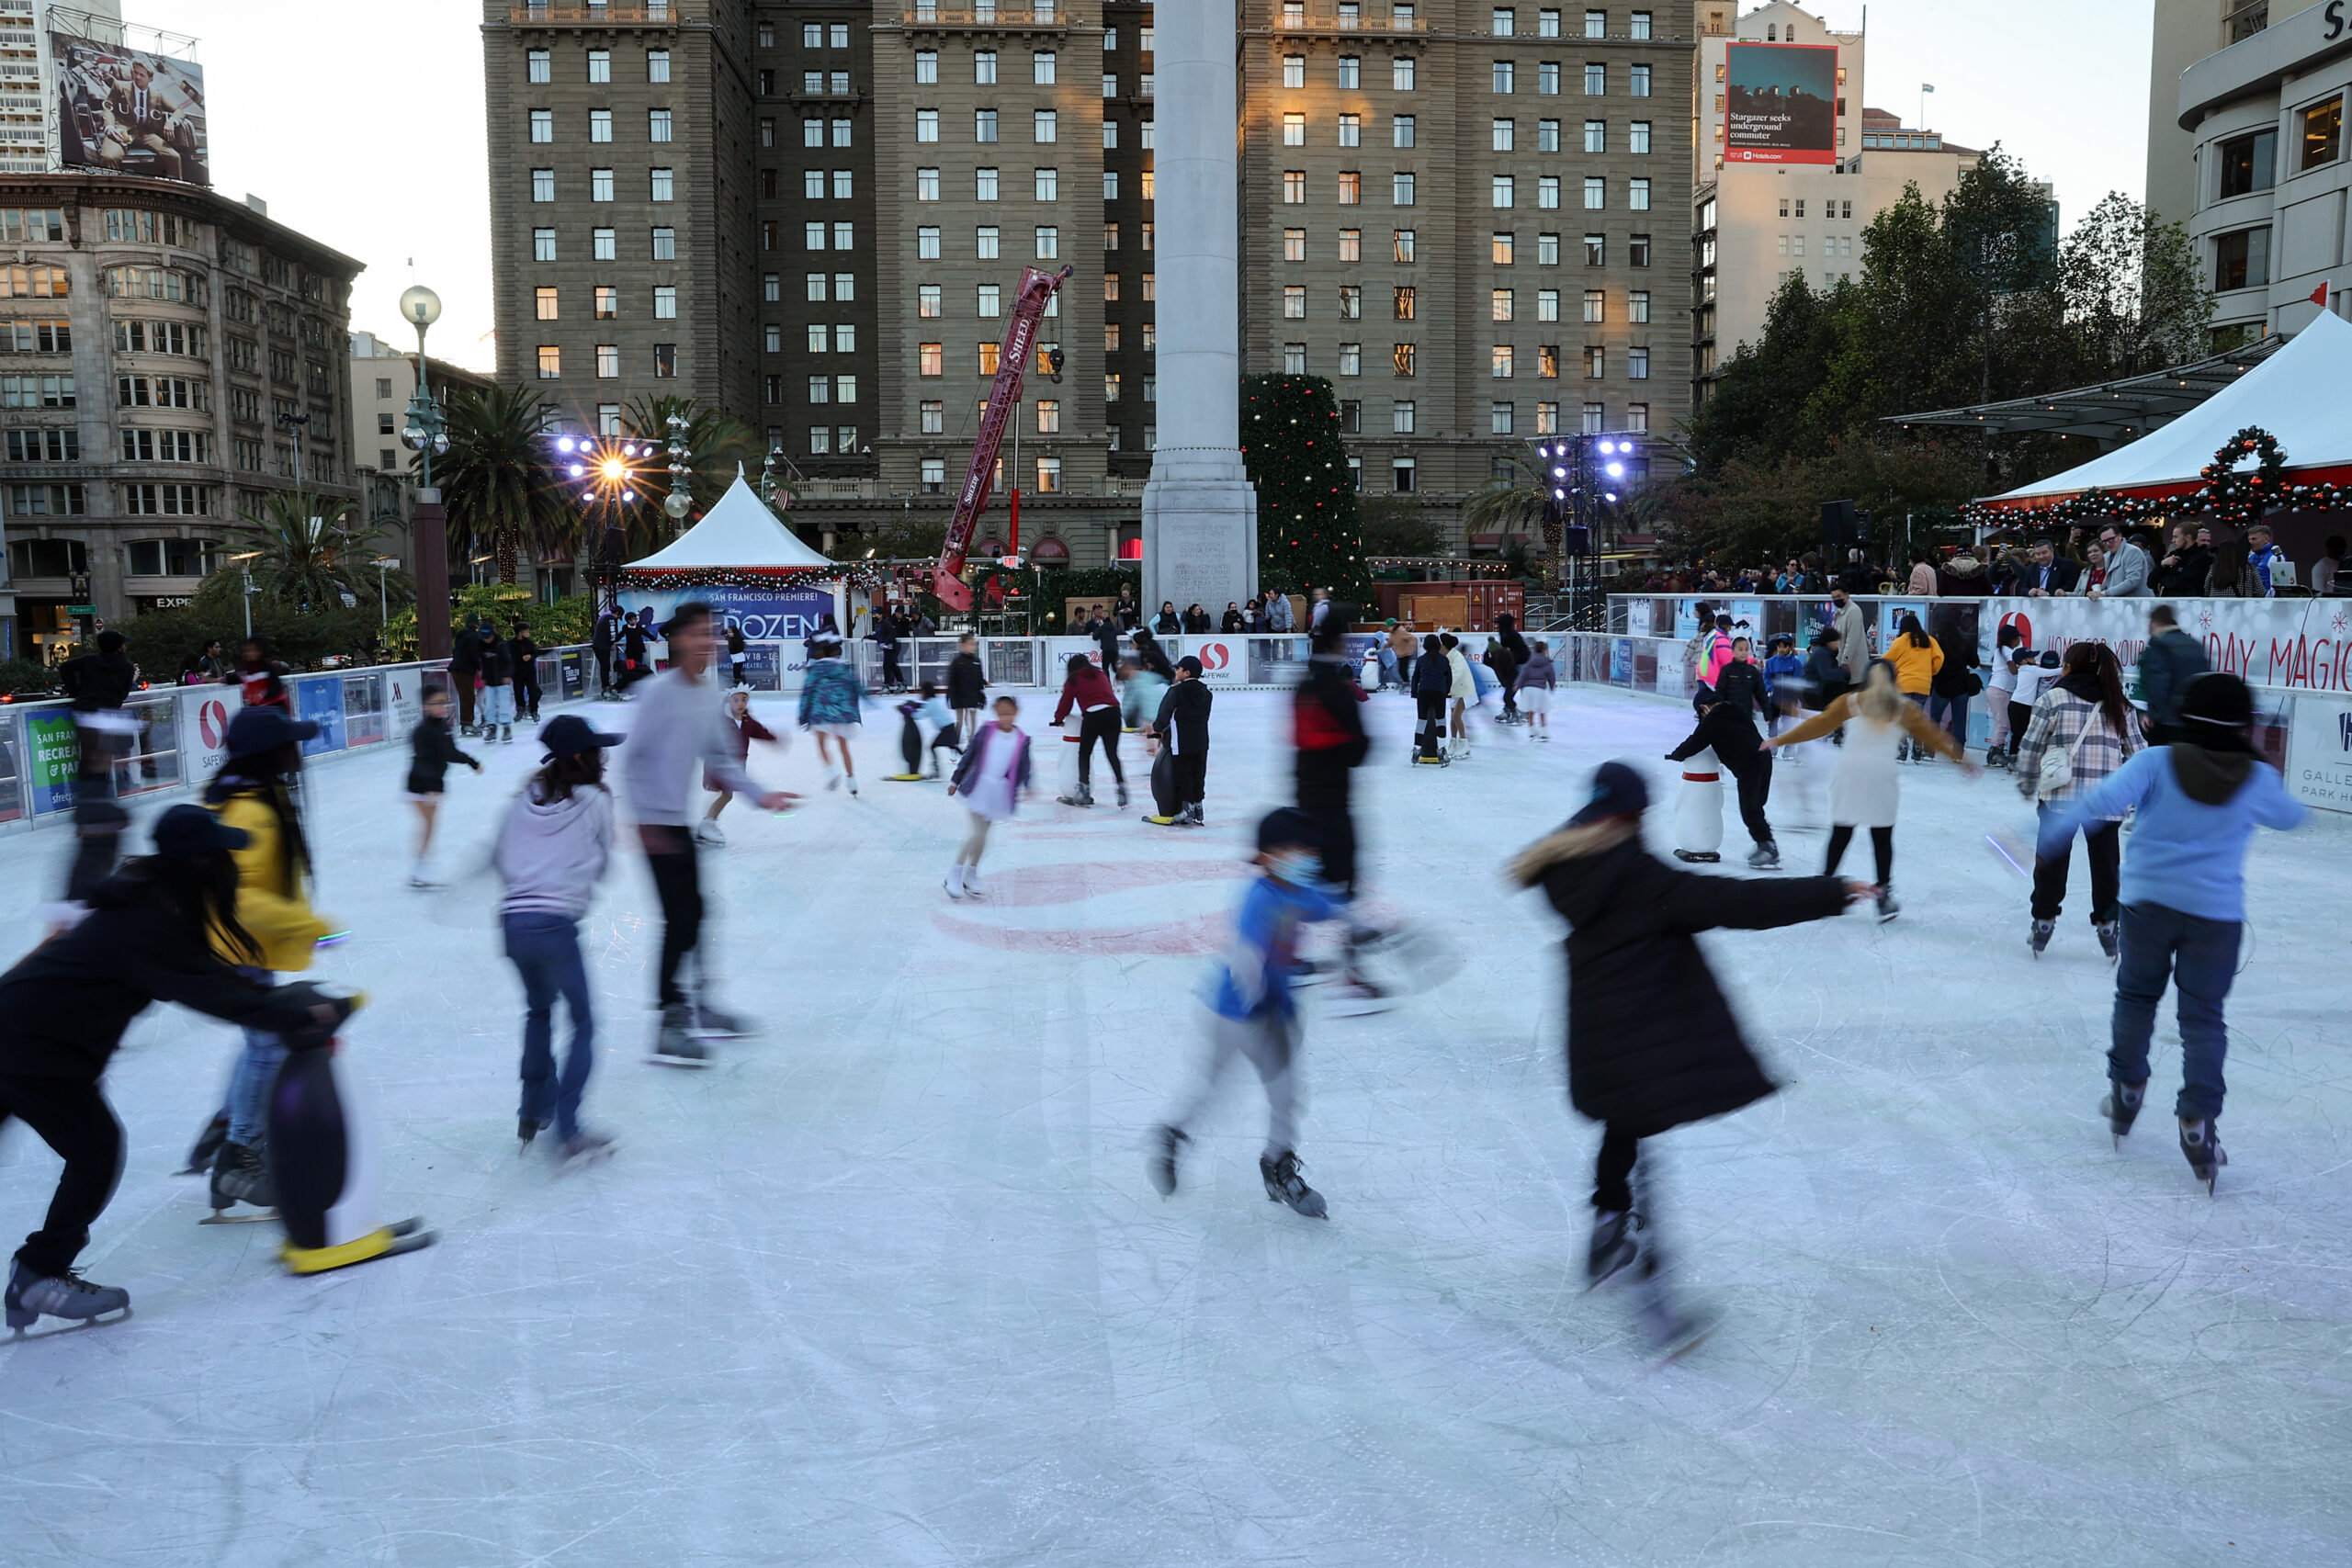 Find Holiday Ice Skating Near You